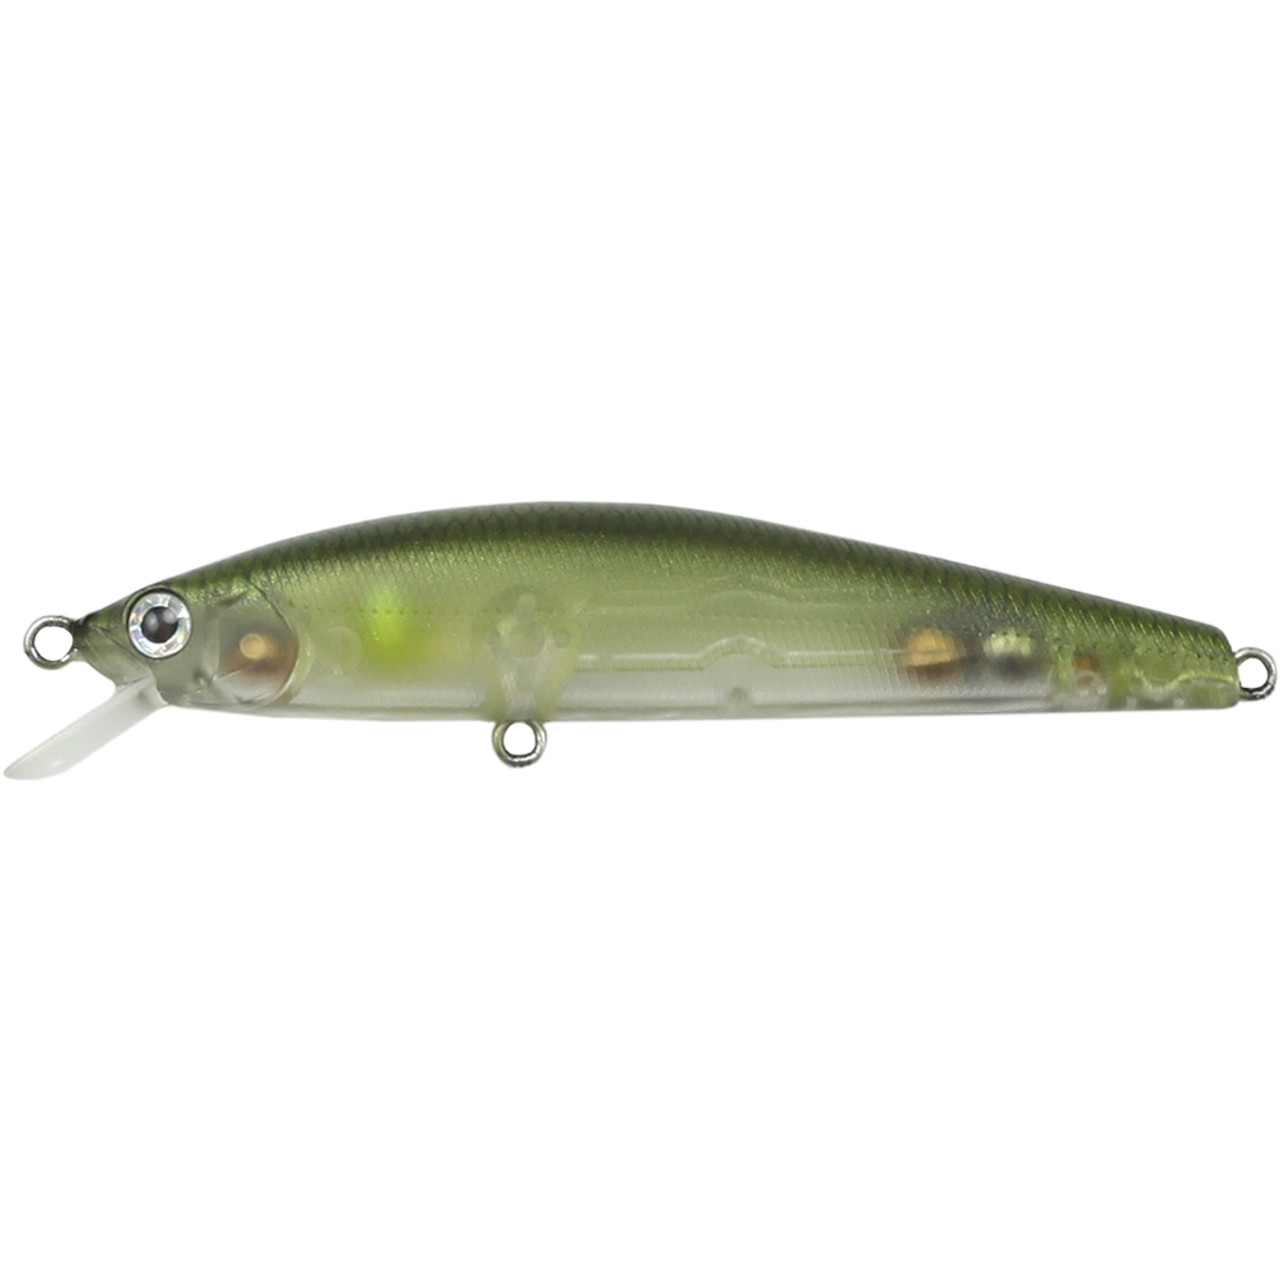 Atomic Hards Jerk Minnow Hard Body Lure 80mm Brown Trout